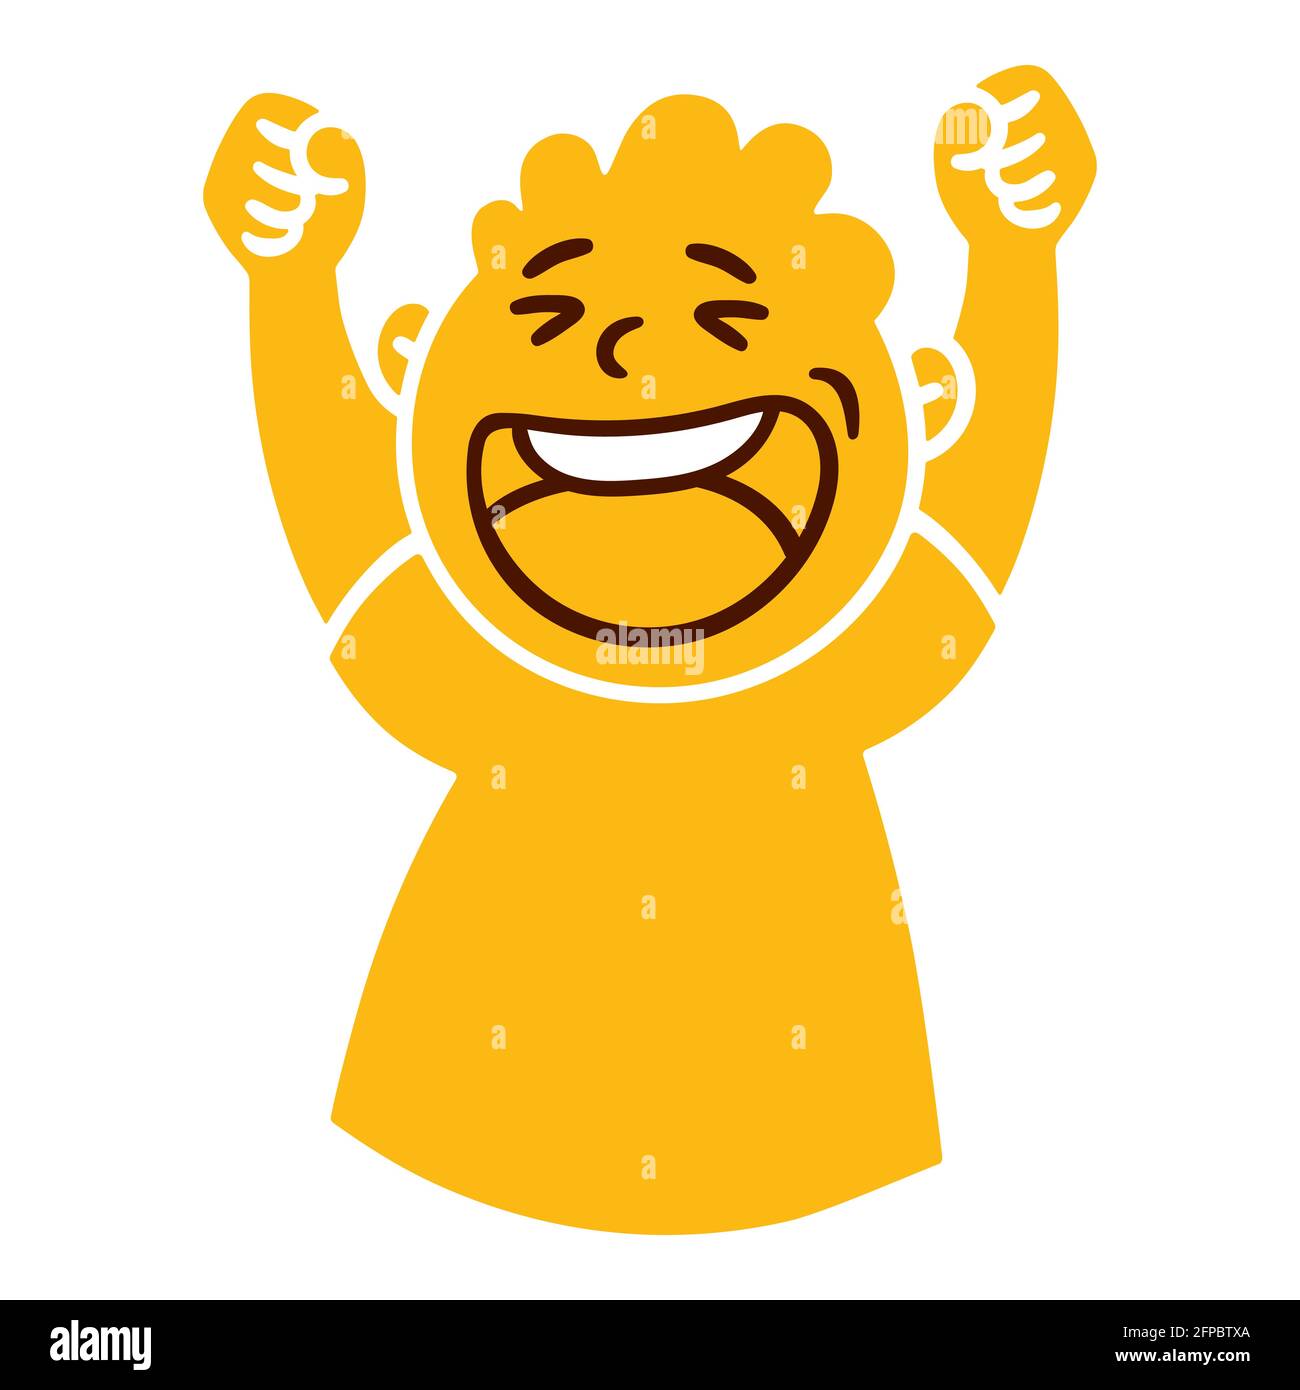 Man with happy emotion. Happy smiling emoji avatar. Portrait of a jubilant person. Cartoon style. Flat design vector illustration. Stock Vector